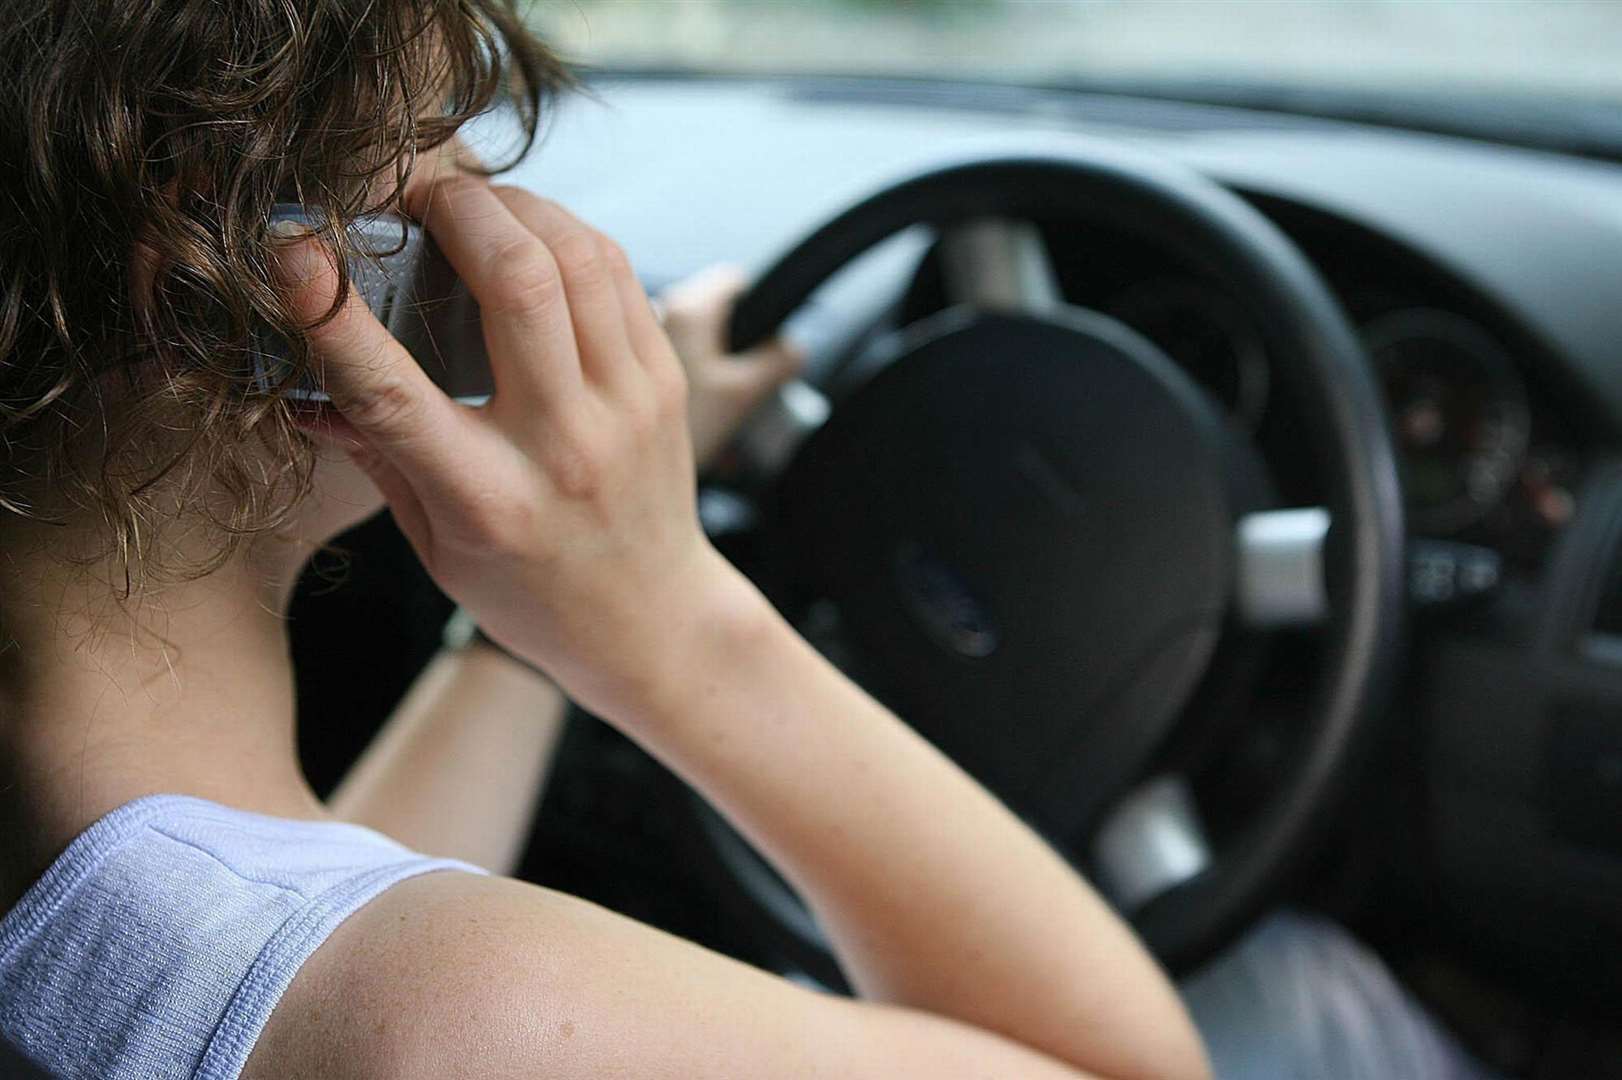 It is already illegal to make a call or text while driving. Image: Stock photo.